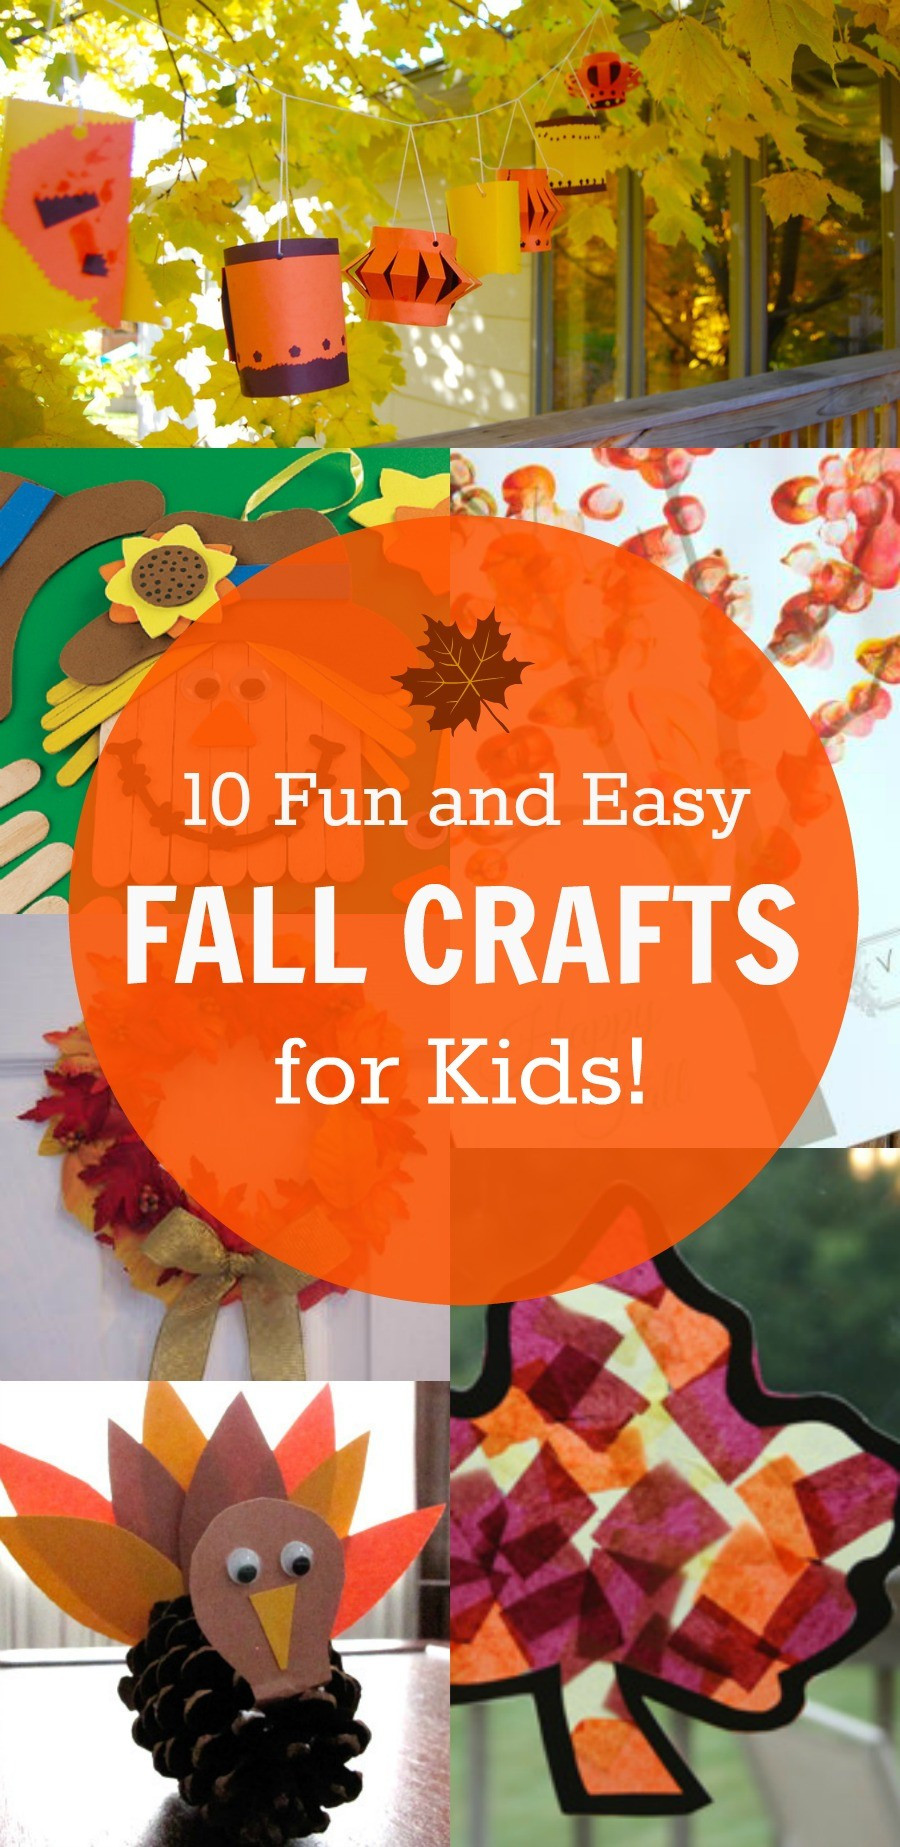 Fun Fall Crafts
 10 Fun and Easy Fall Crafts for Kids Love These Ideas